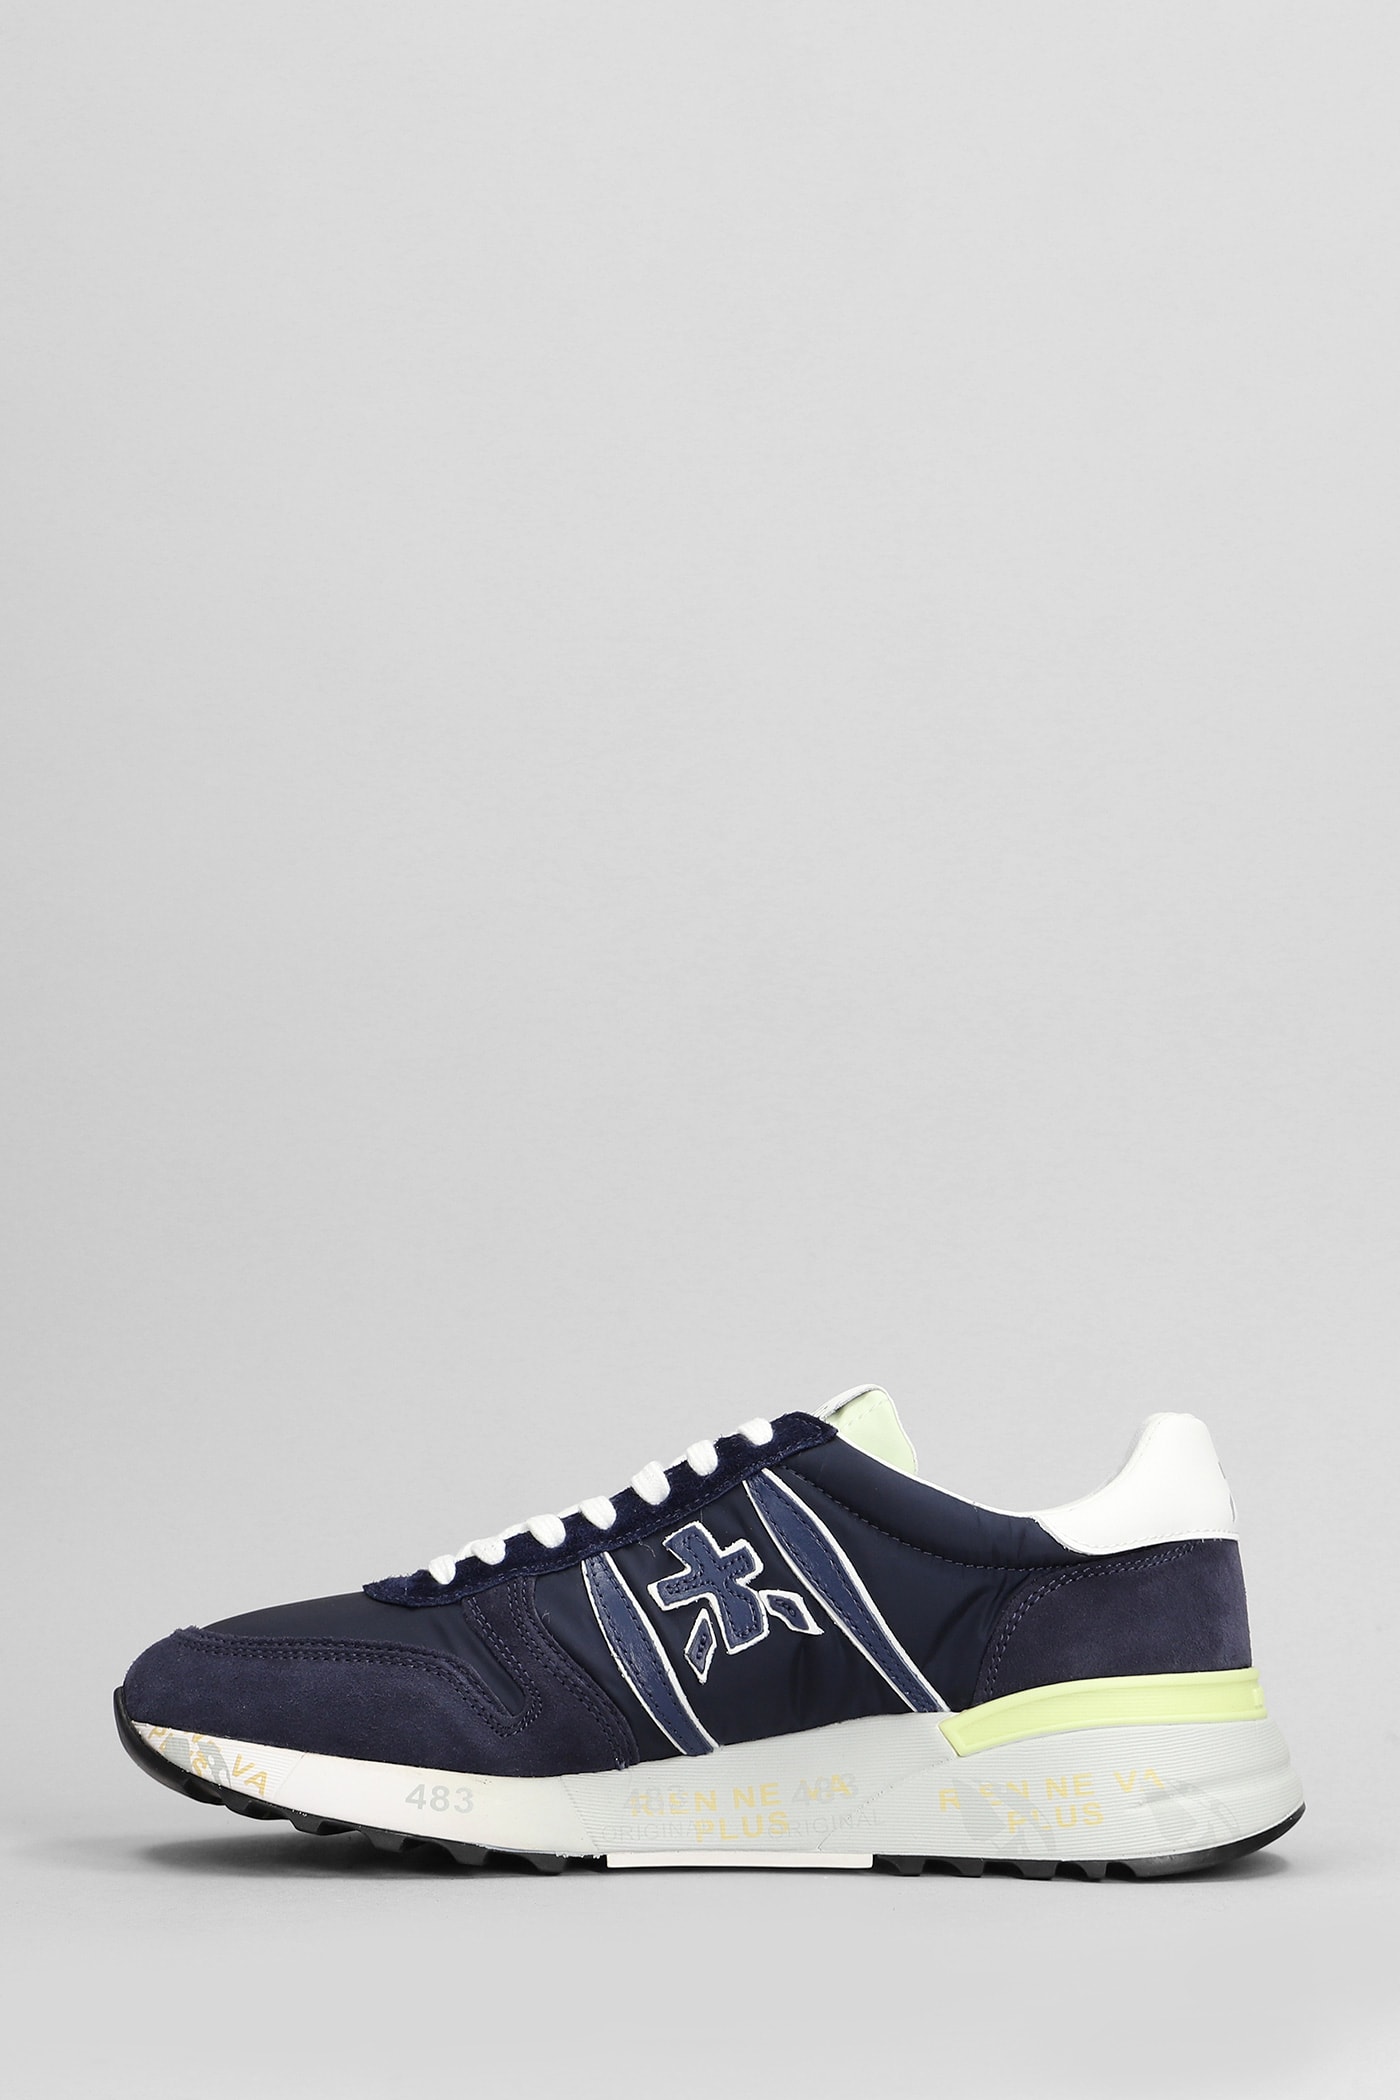 Shop Premiata Lander Sneakers In Blue Suede And Fabric